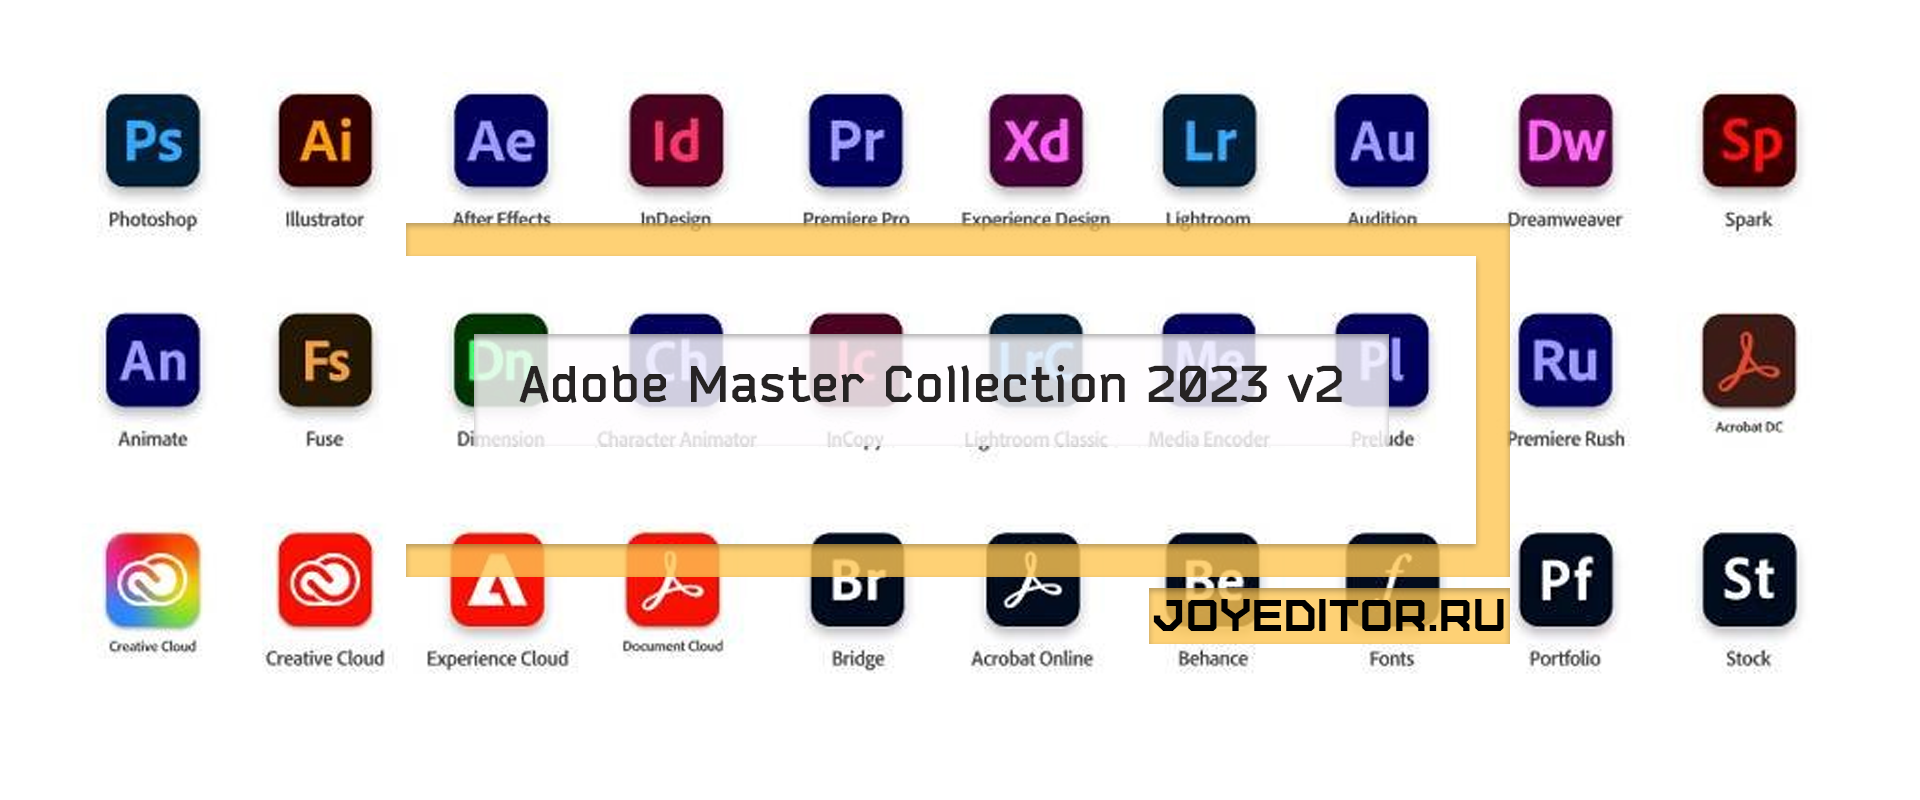 Adobe Master. Master collection. Adobe Pack 2023. Adobe collection 2023